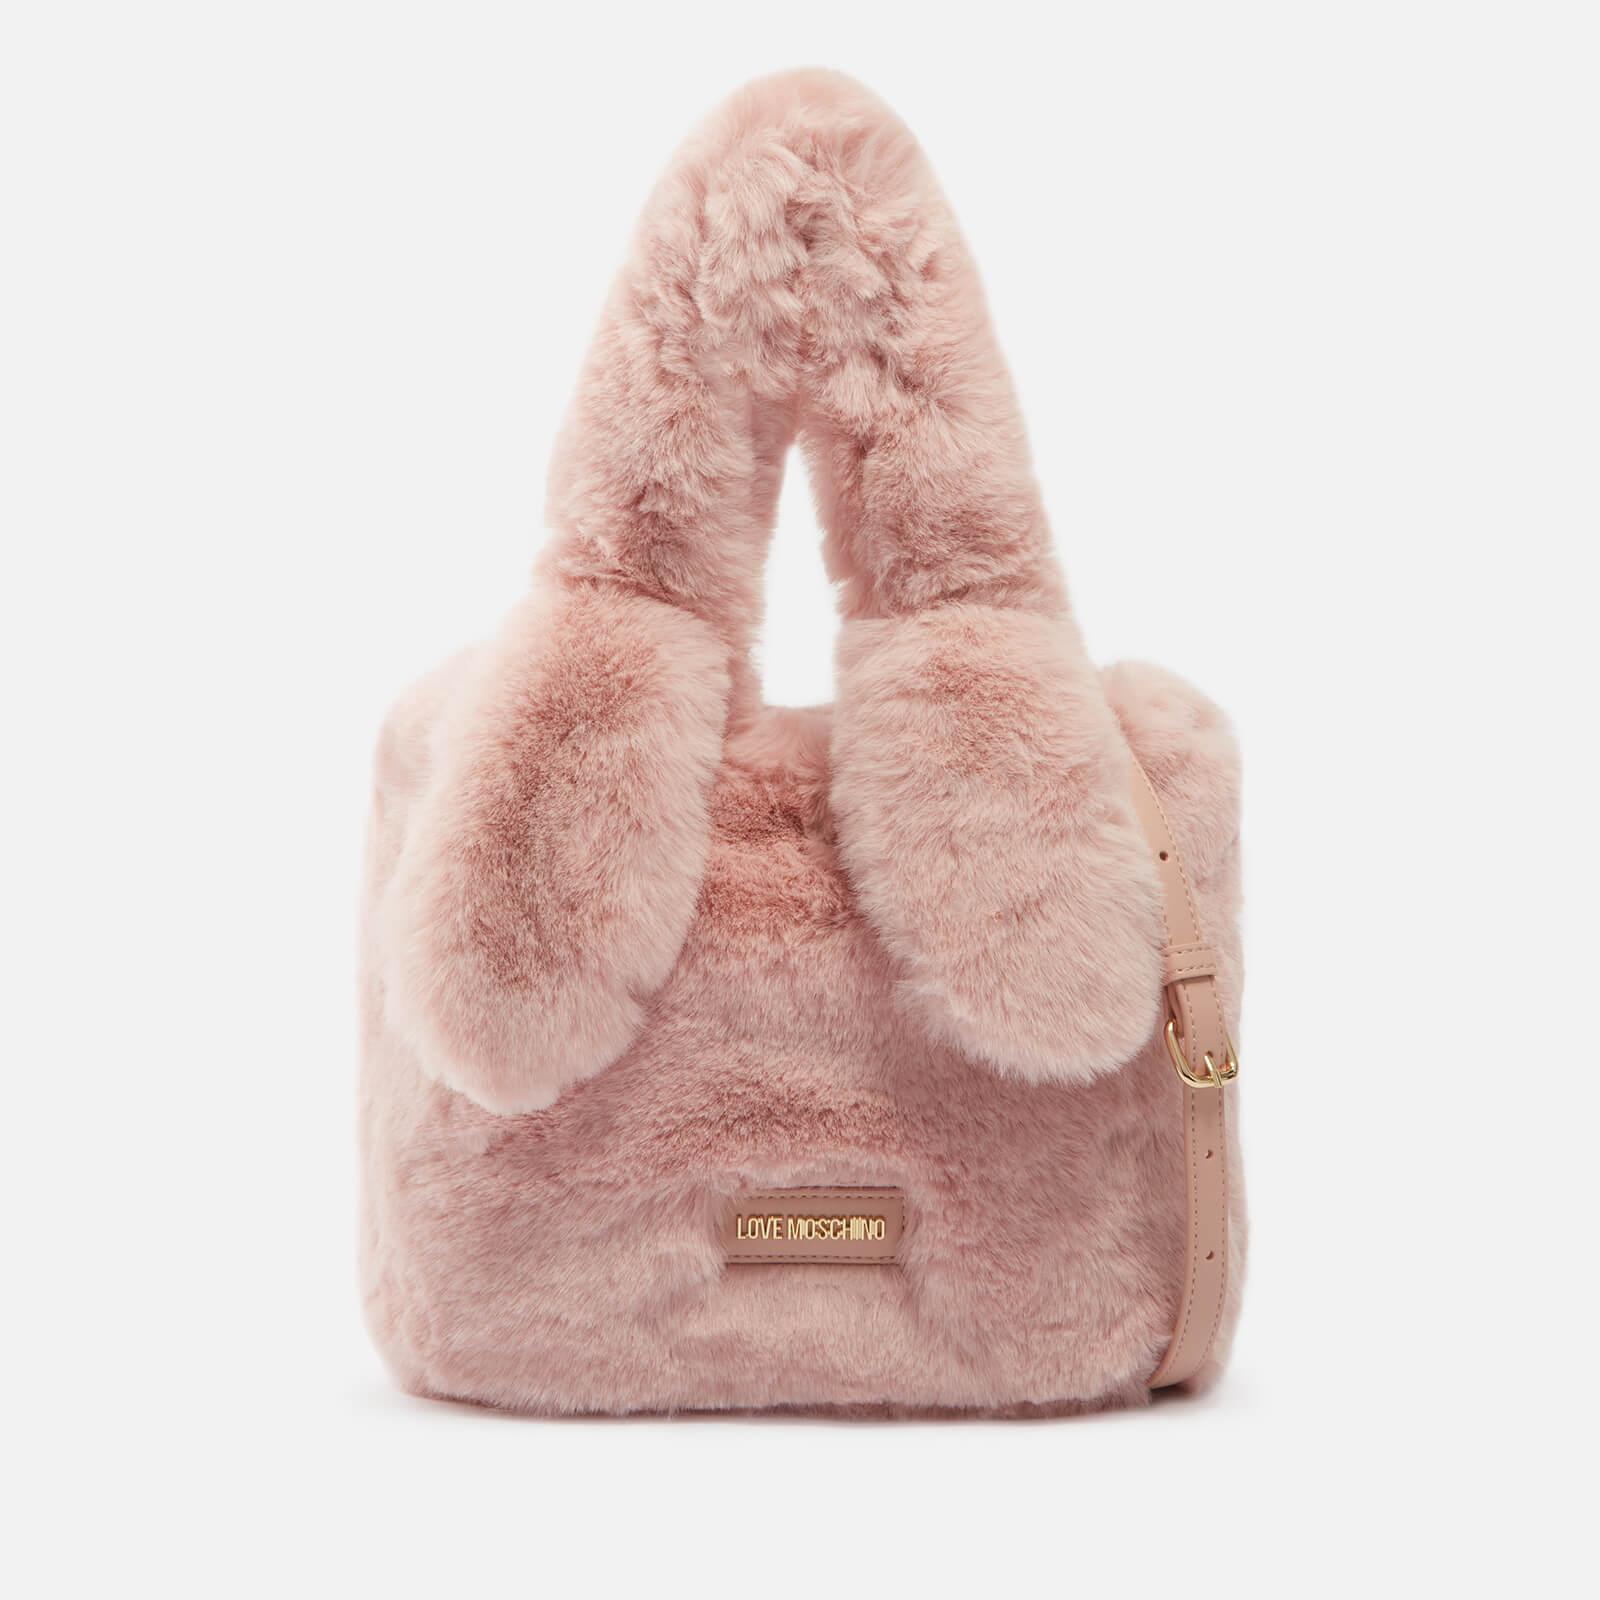 Love Moschino Bunny Faux Fur Tote Bag in Pink | Lyst Canada